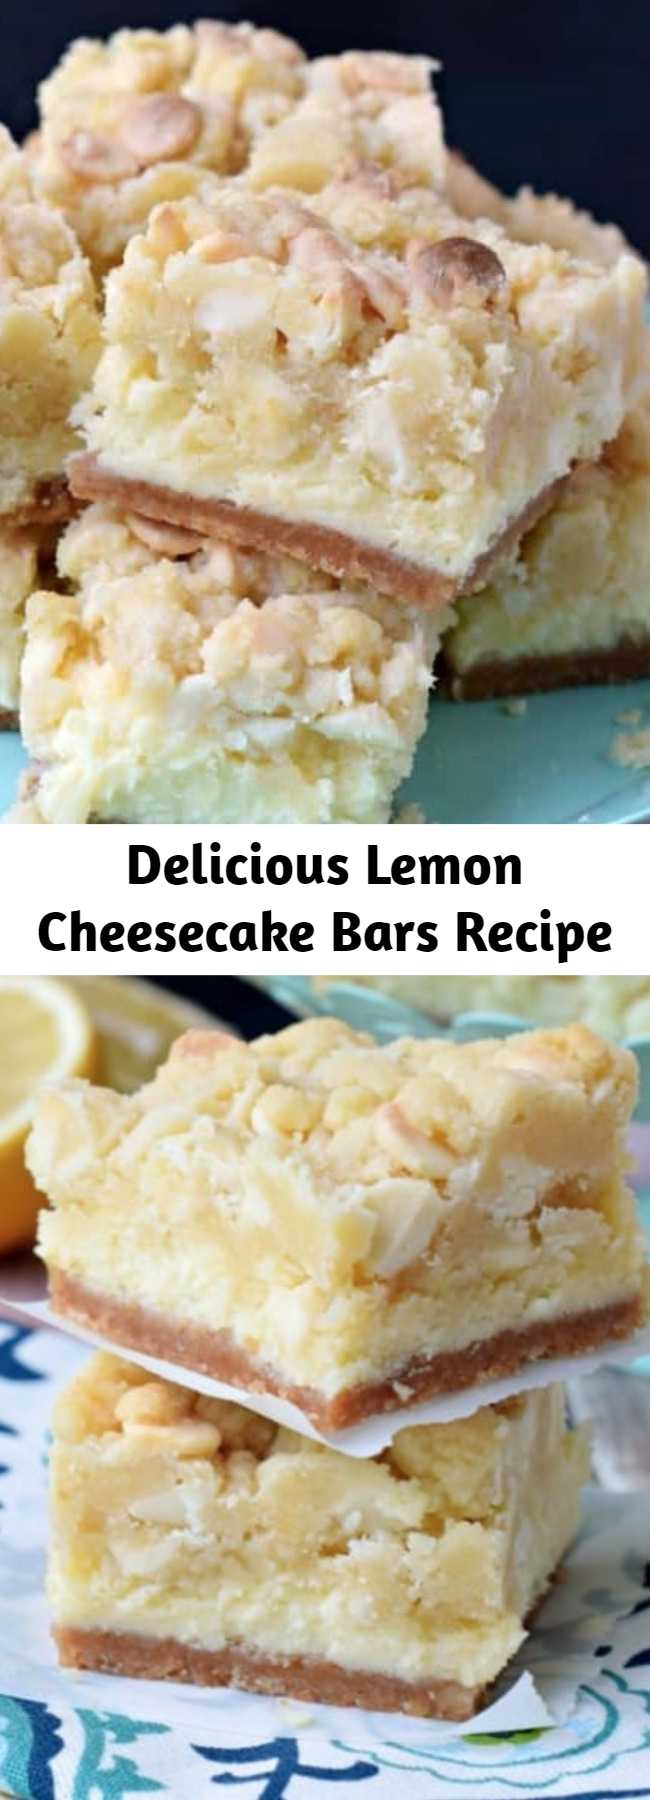 Delicious Lemon Cheesecake Bars Recipe - Sweet Lemon Cheesecake Bars have a graham cracker crust, lemon cheesecake filling, and white chocolate chip cookie topping! One of the most delicious desserts ever!!